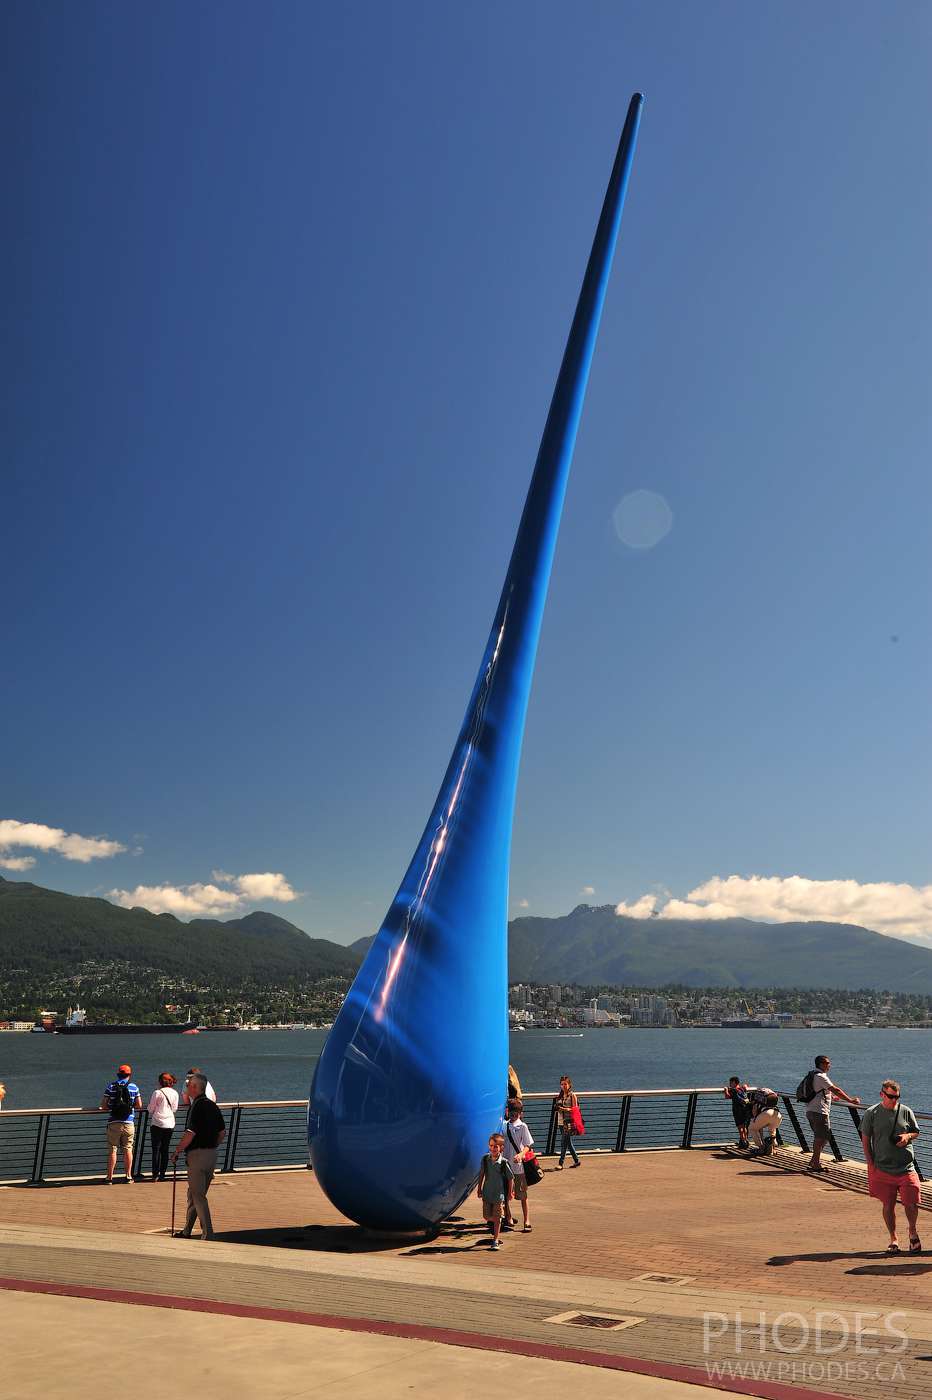 Giant raindrop statue in Vancouver